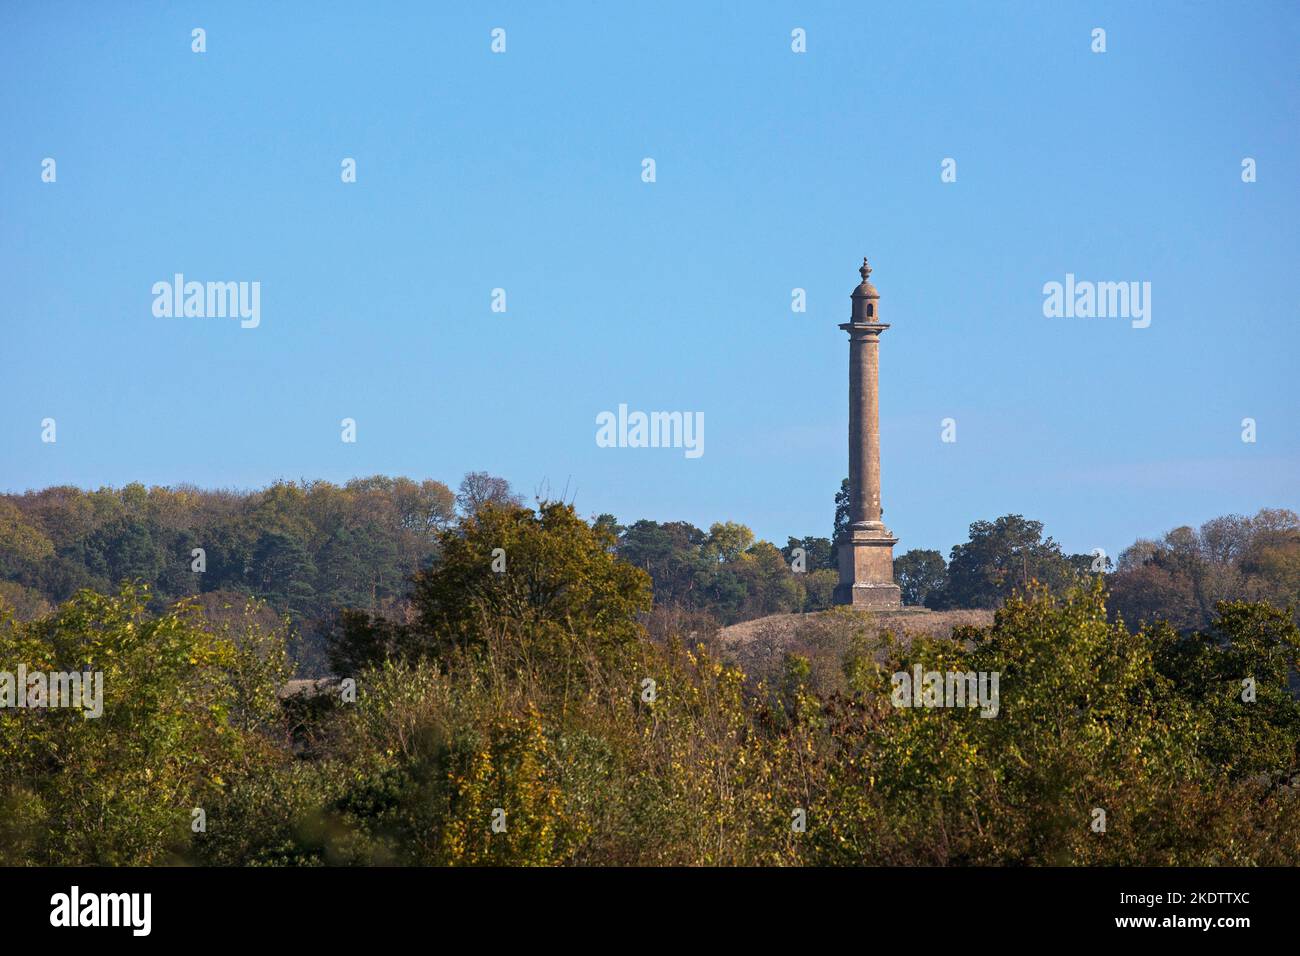 Burton Pynsent Monument, Curry Rivel, Somerset Levels, England, UK, October 2018 Stock Photo